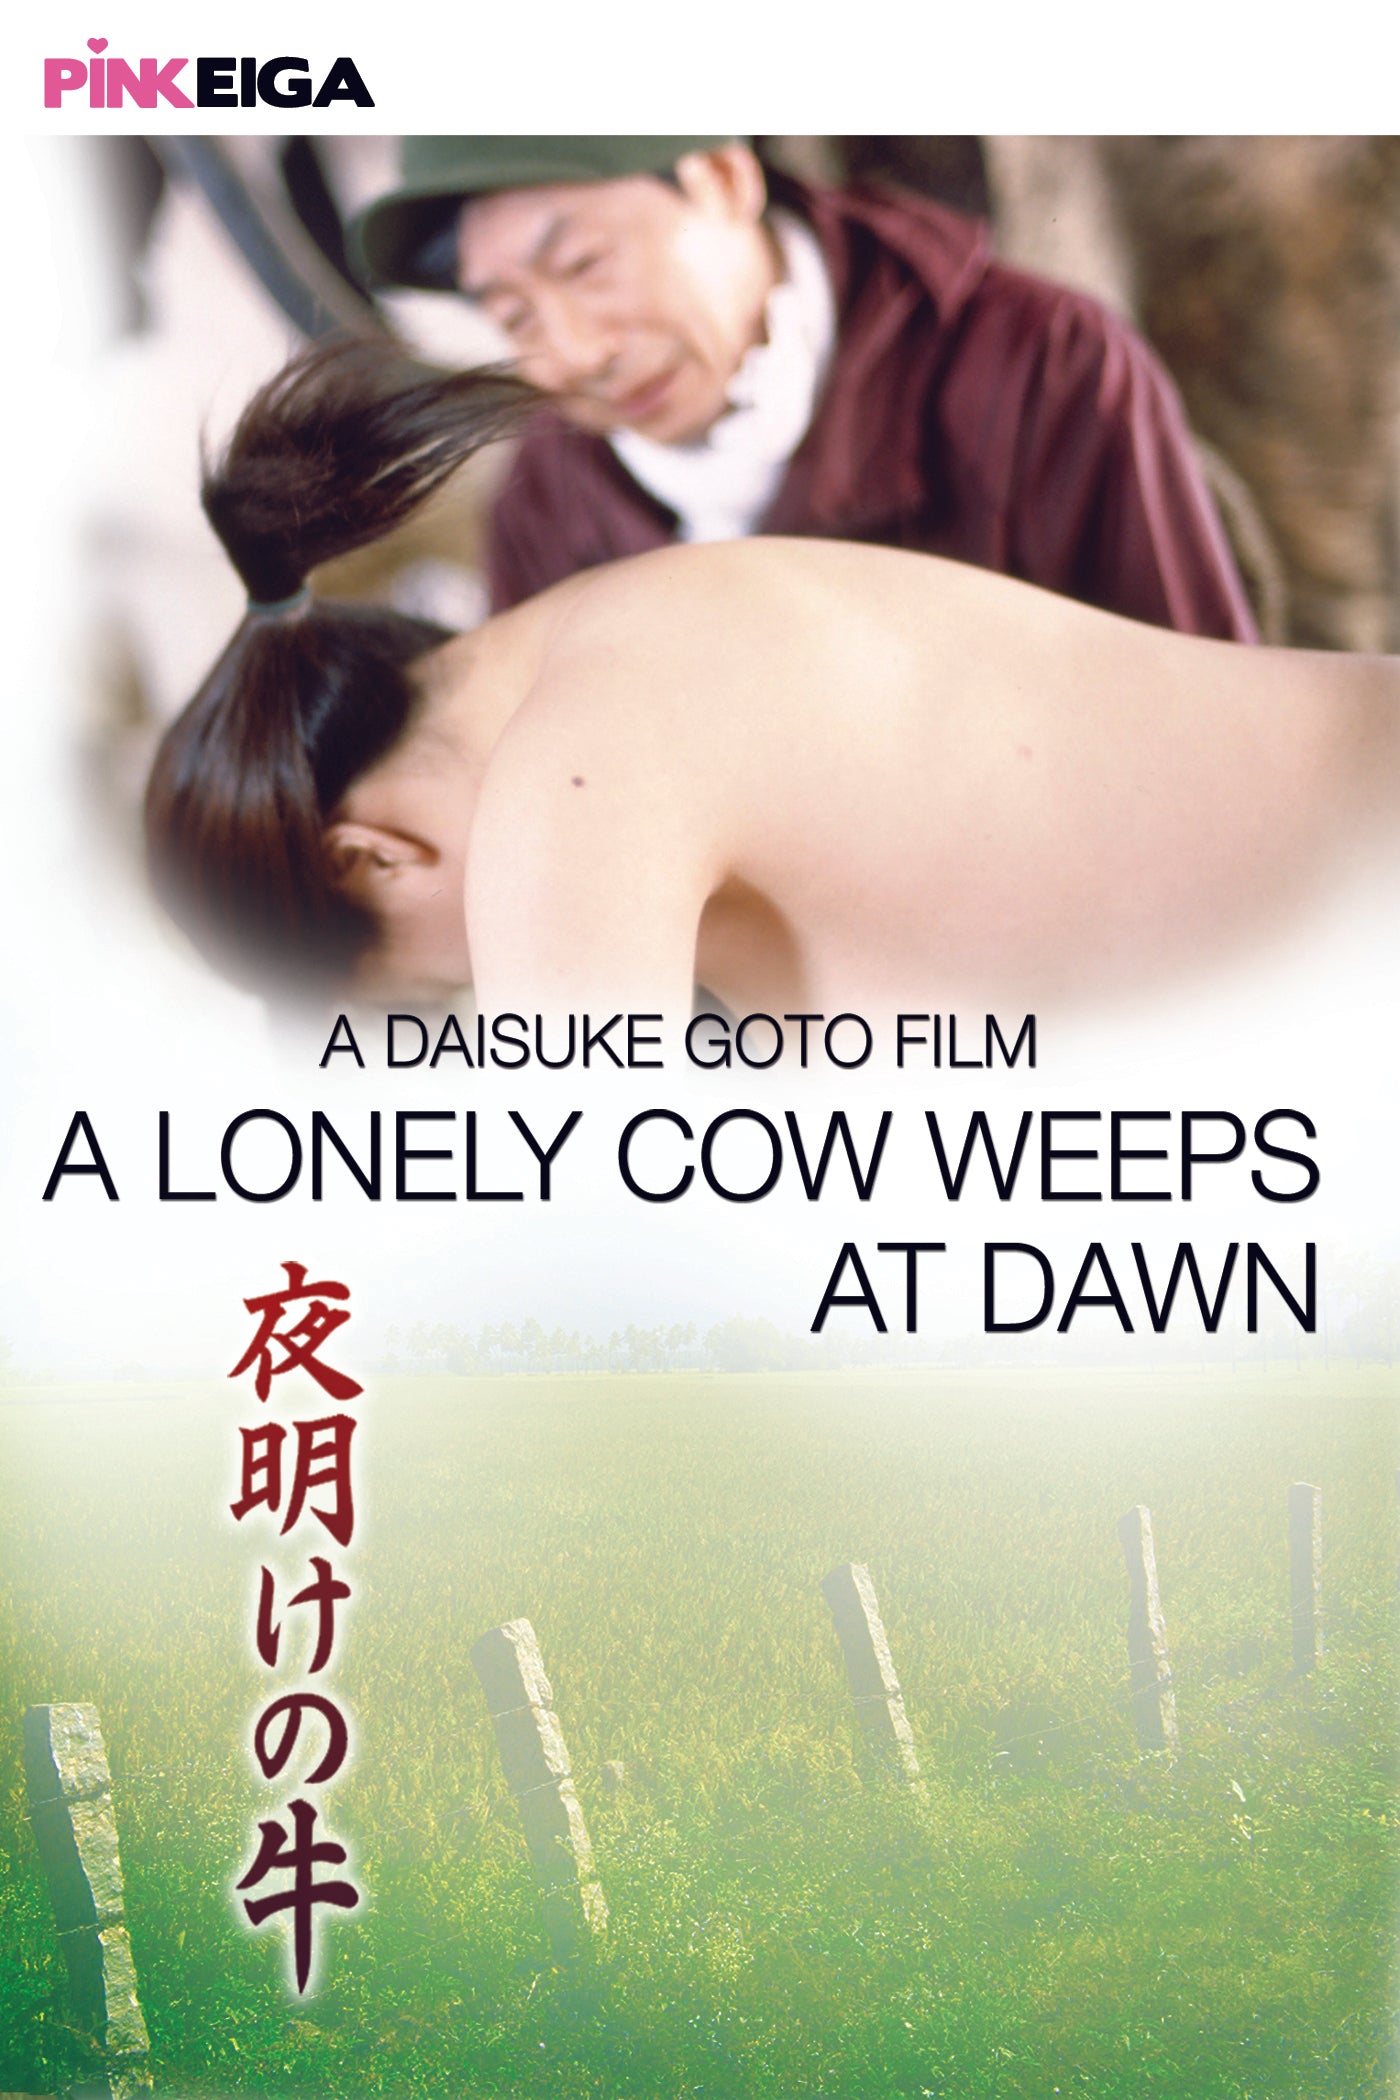 A LONELY COW WEEPS AT DAWN DVD